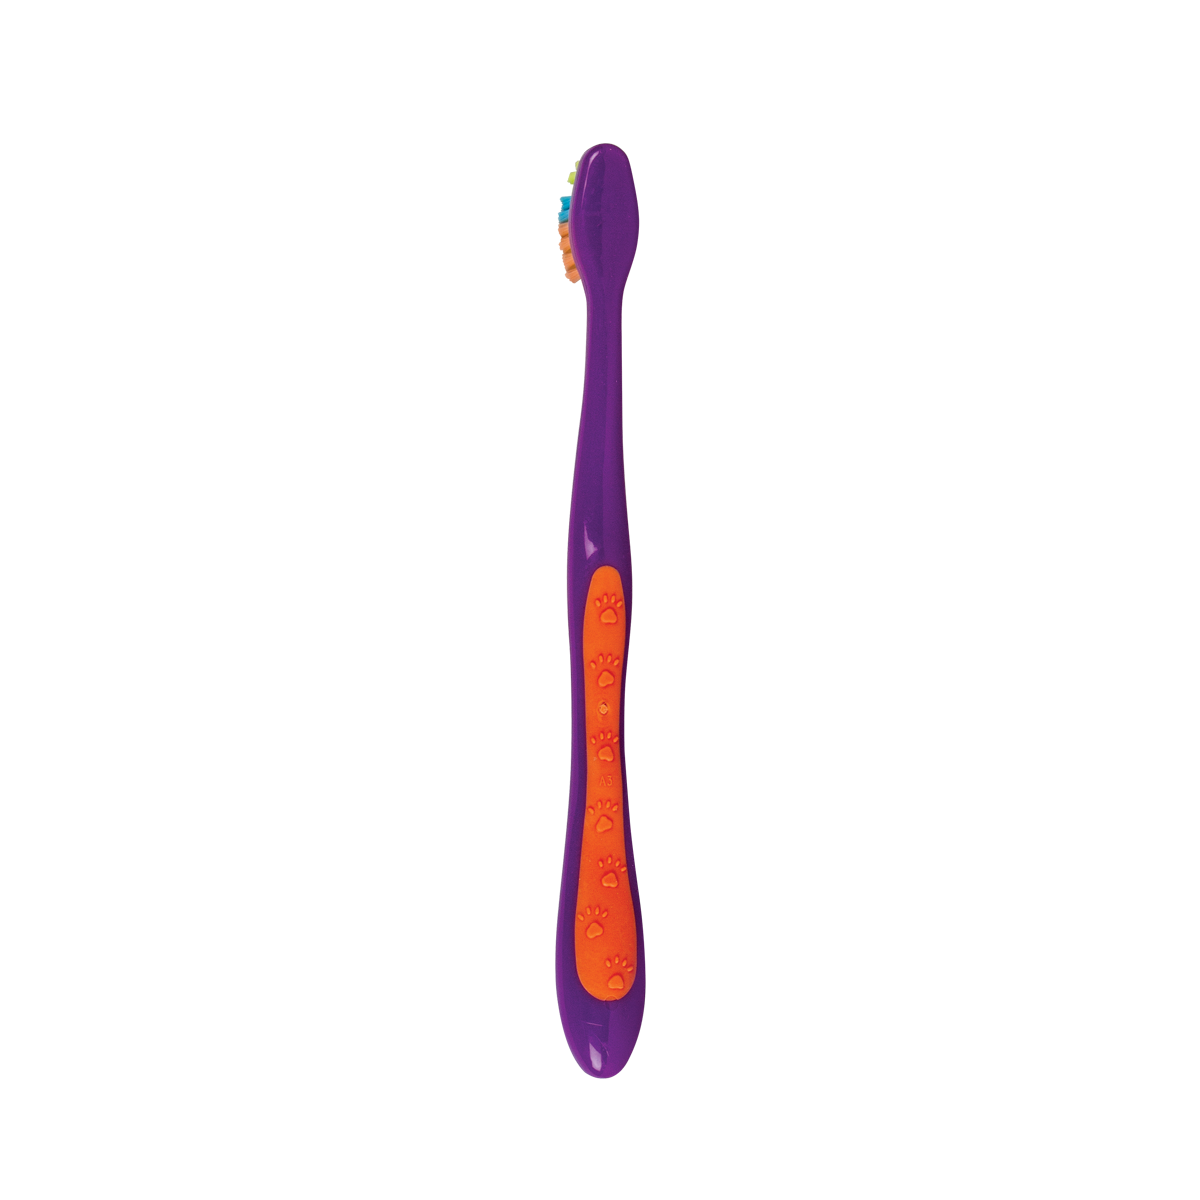 Back View of SmartSmile Pedo Toothbrushes